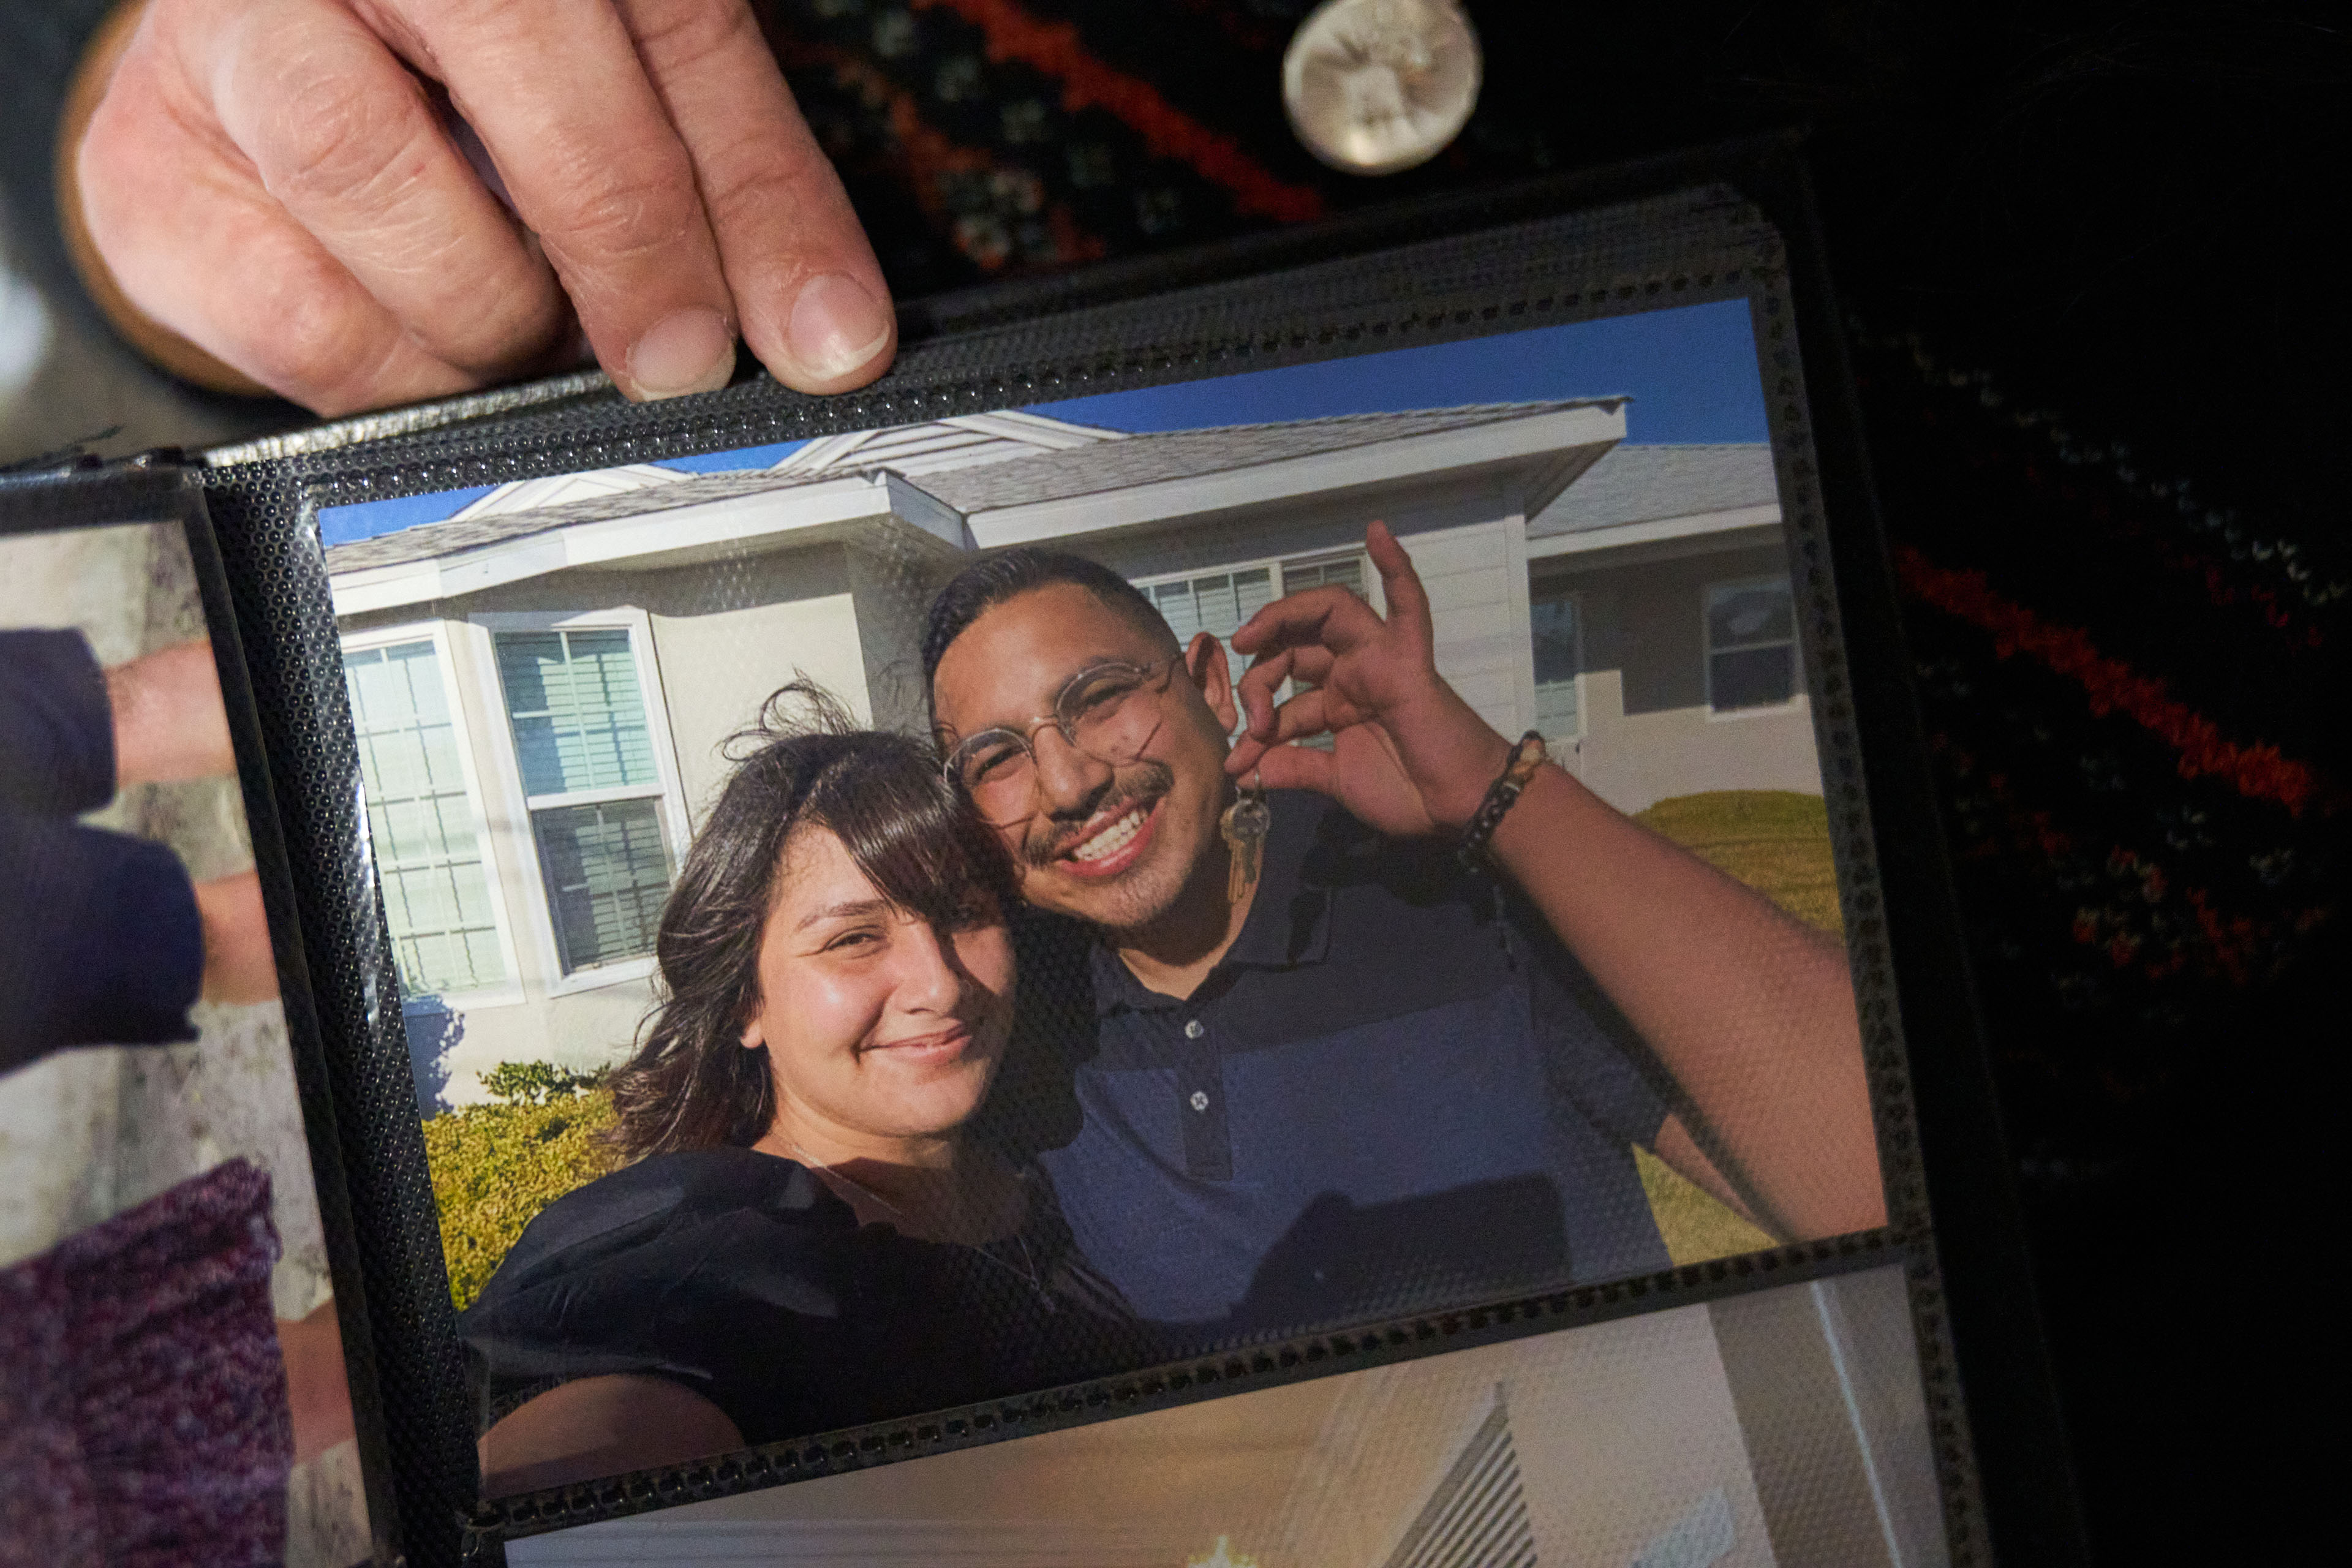 María Rivas Cruz holds up a photo in an album to the camera. It shows a photo of her and Raymond Olivares smiling in front of a house they just bought together. Olivares holds the house key up with a big smile.